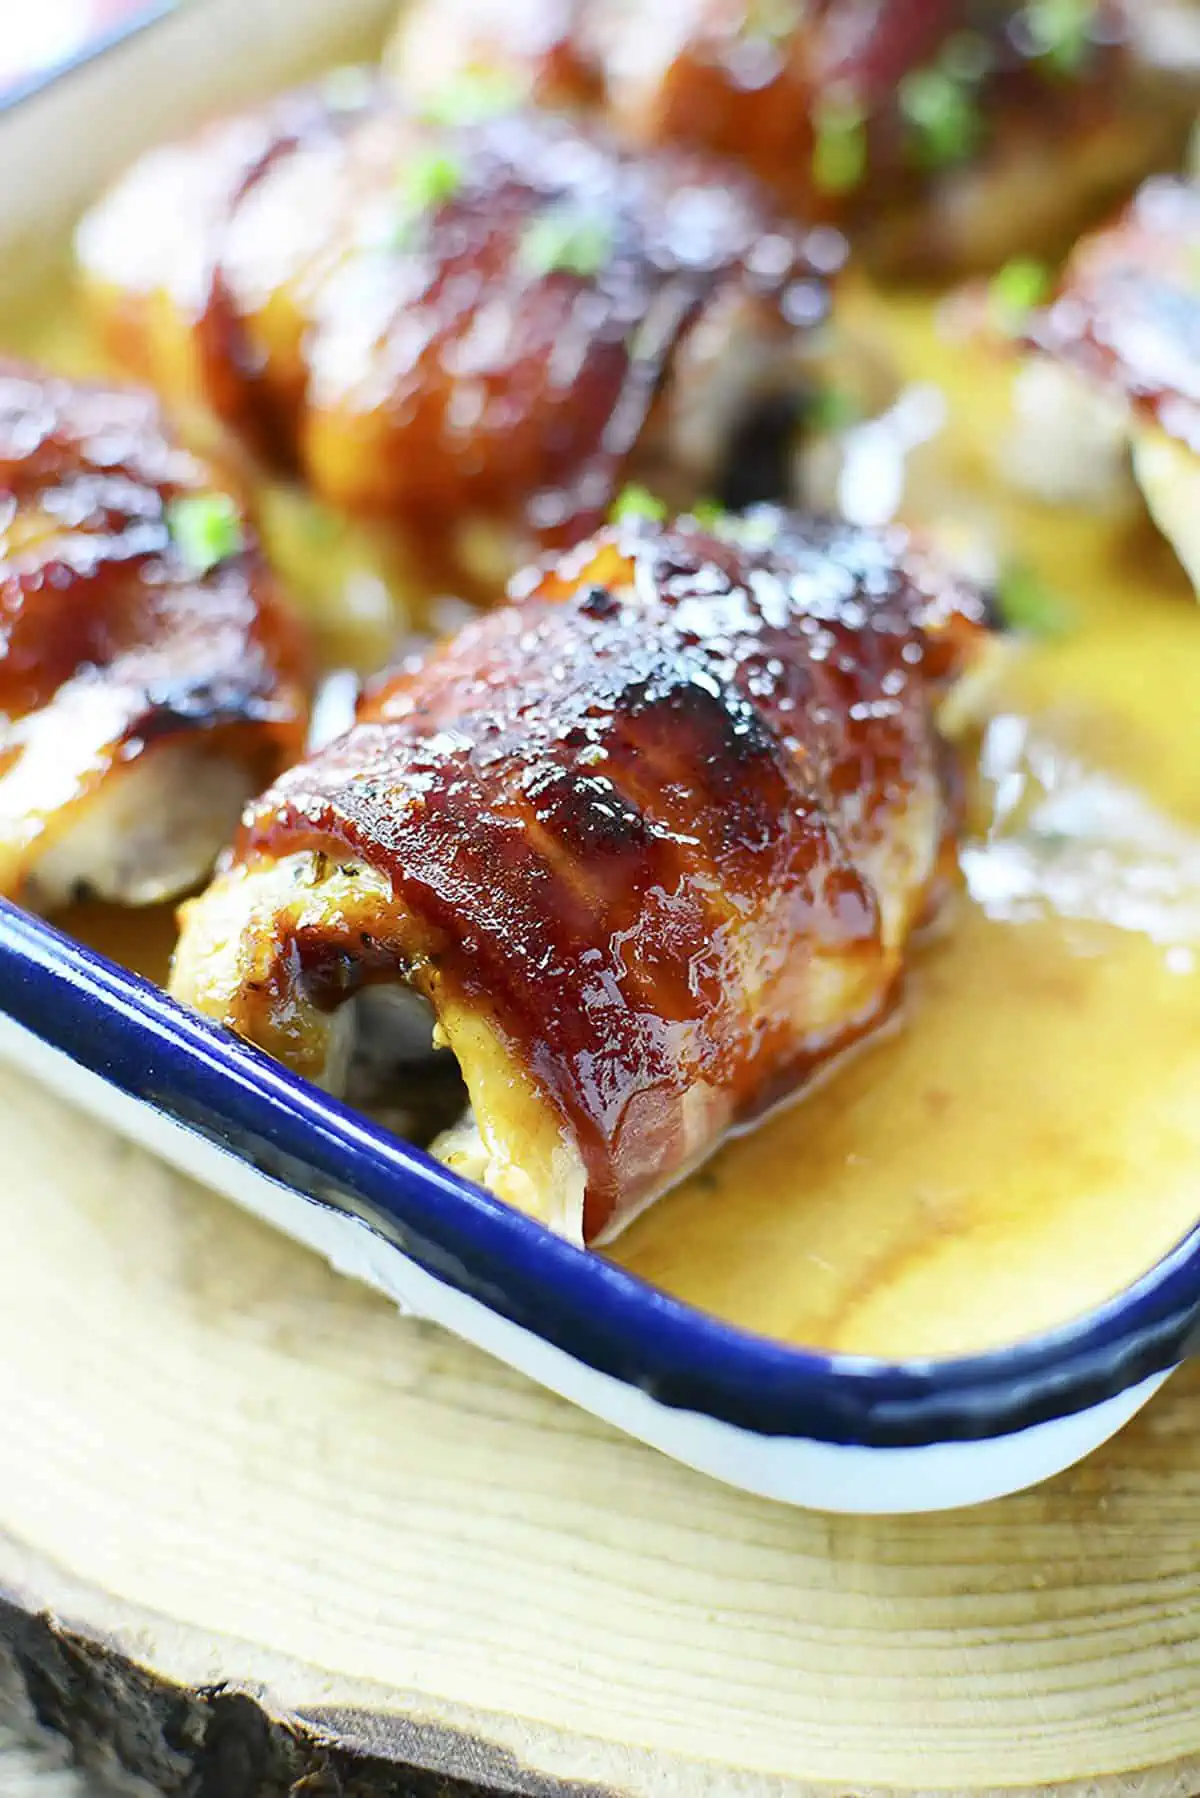 One cooked bbq chicken thigh that is surrounded by a few others, sits in a baking dish.